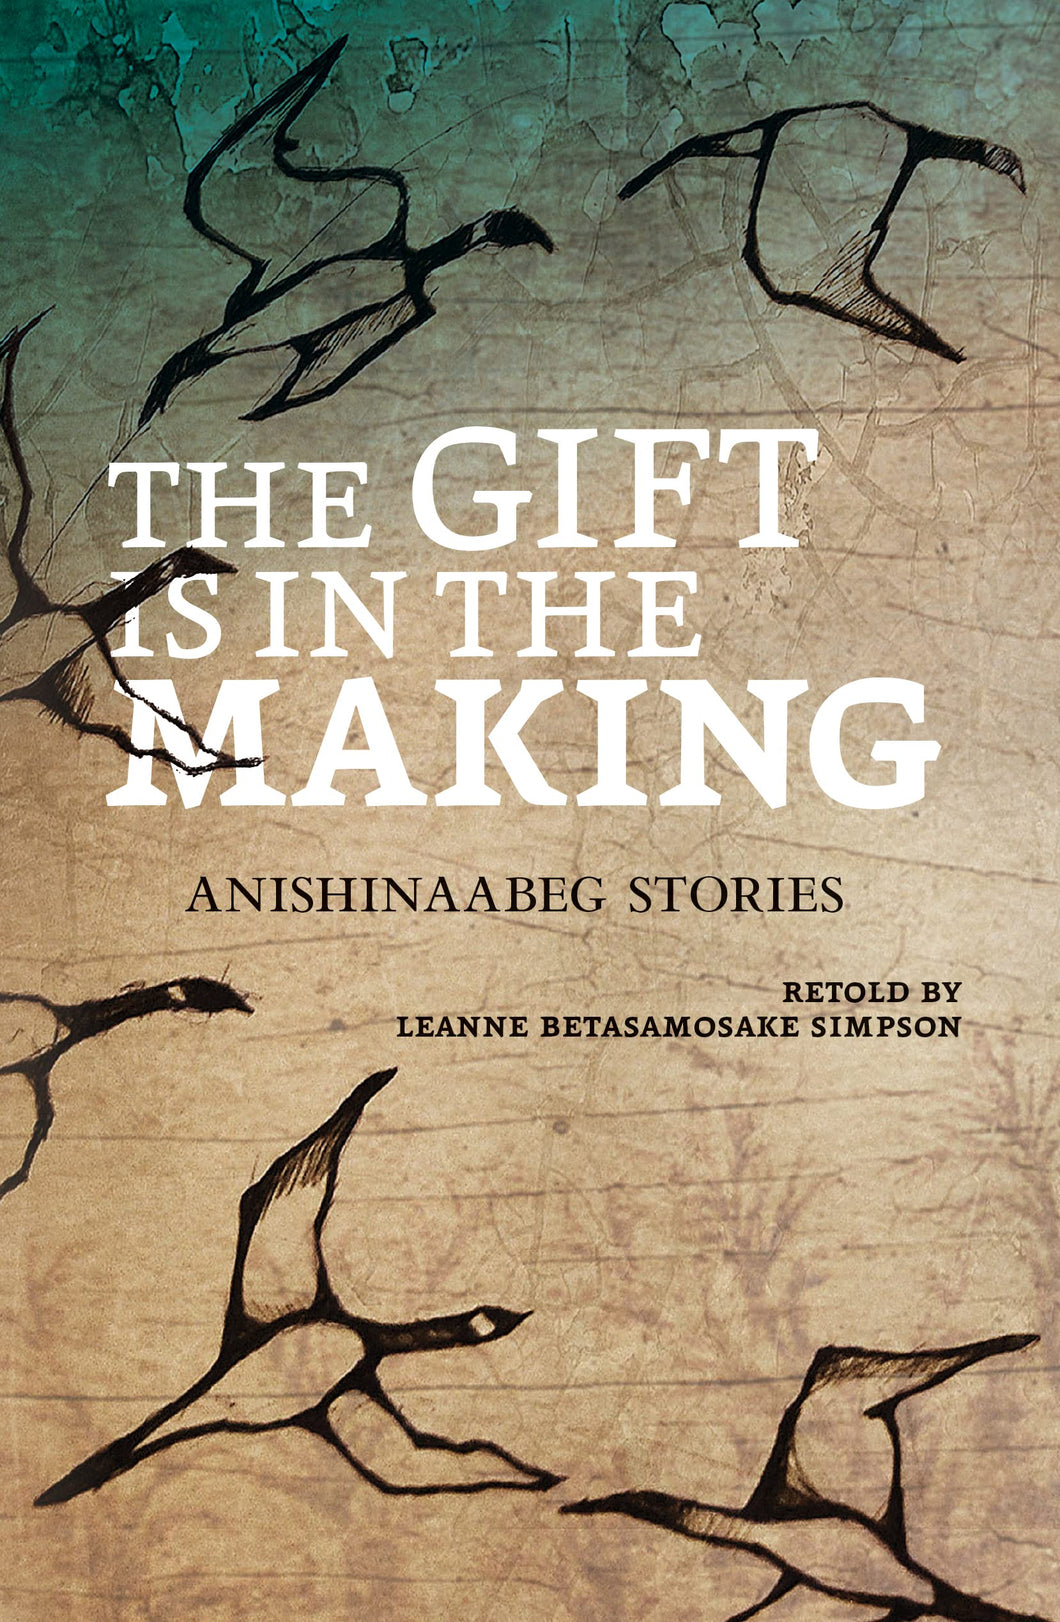 The Gift Is in the Making: Anishinaabeg Stories [Leanne Betasamosake Simpson]